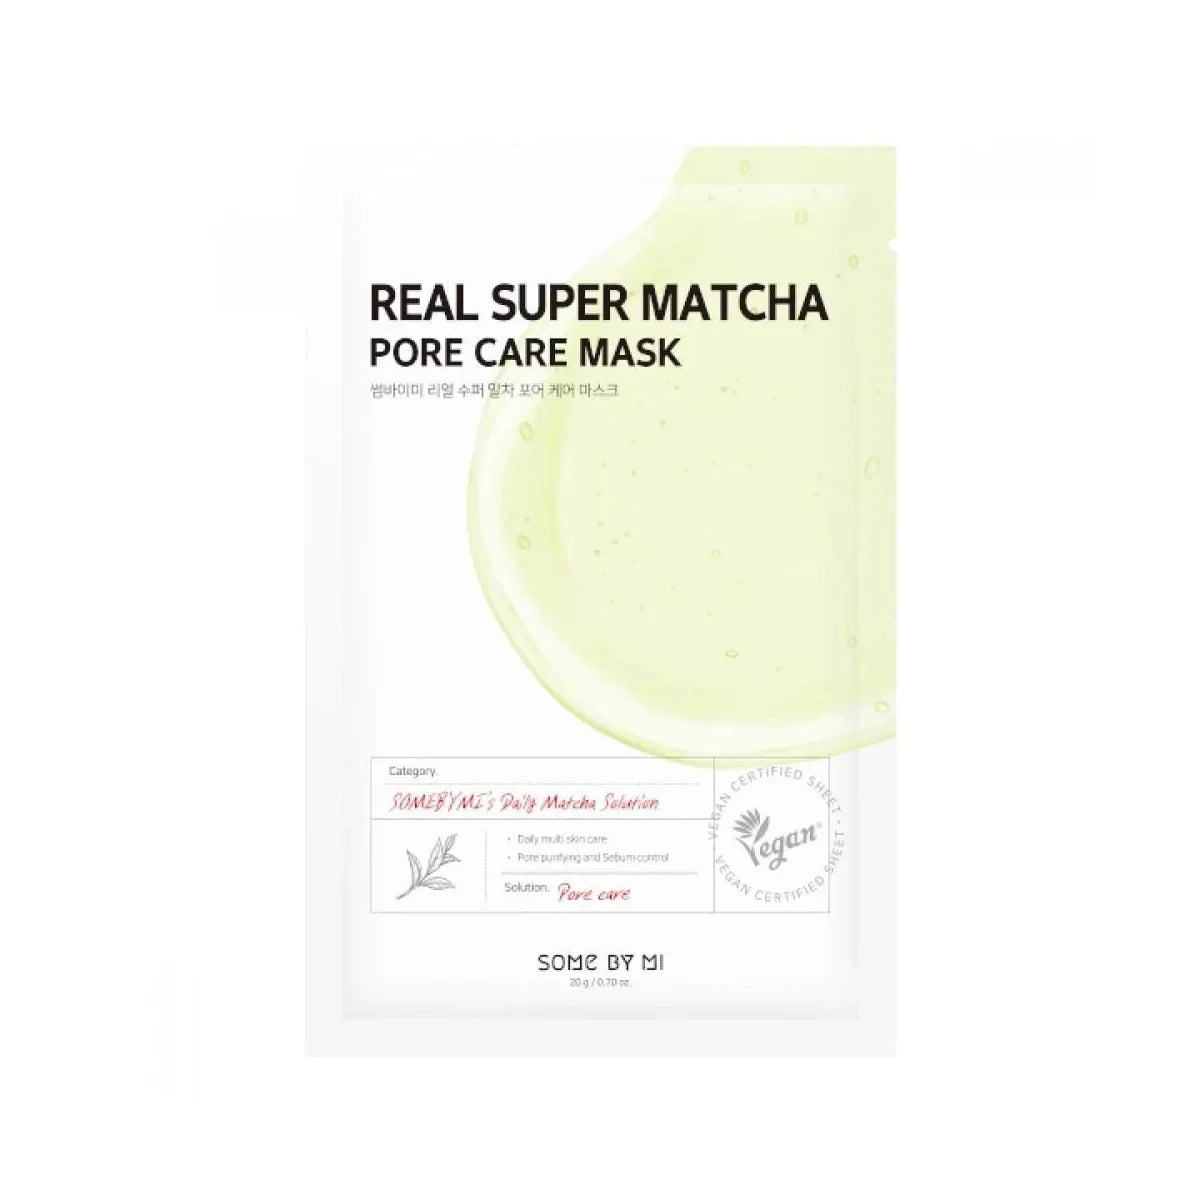 Some By Mi Real Super Matcha Pore Care Mask best Korean hydrating soothing sheet mask for all skin types ages men women self-care anti-aging wrinkles fine lines K Beauty World